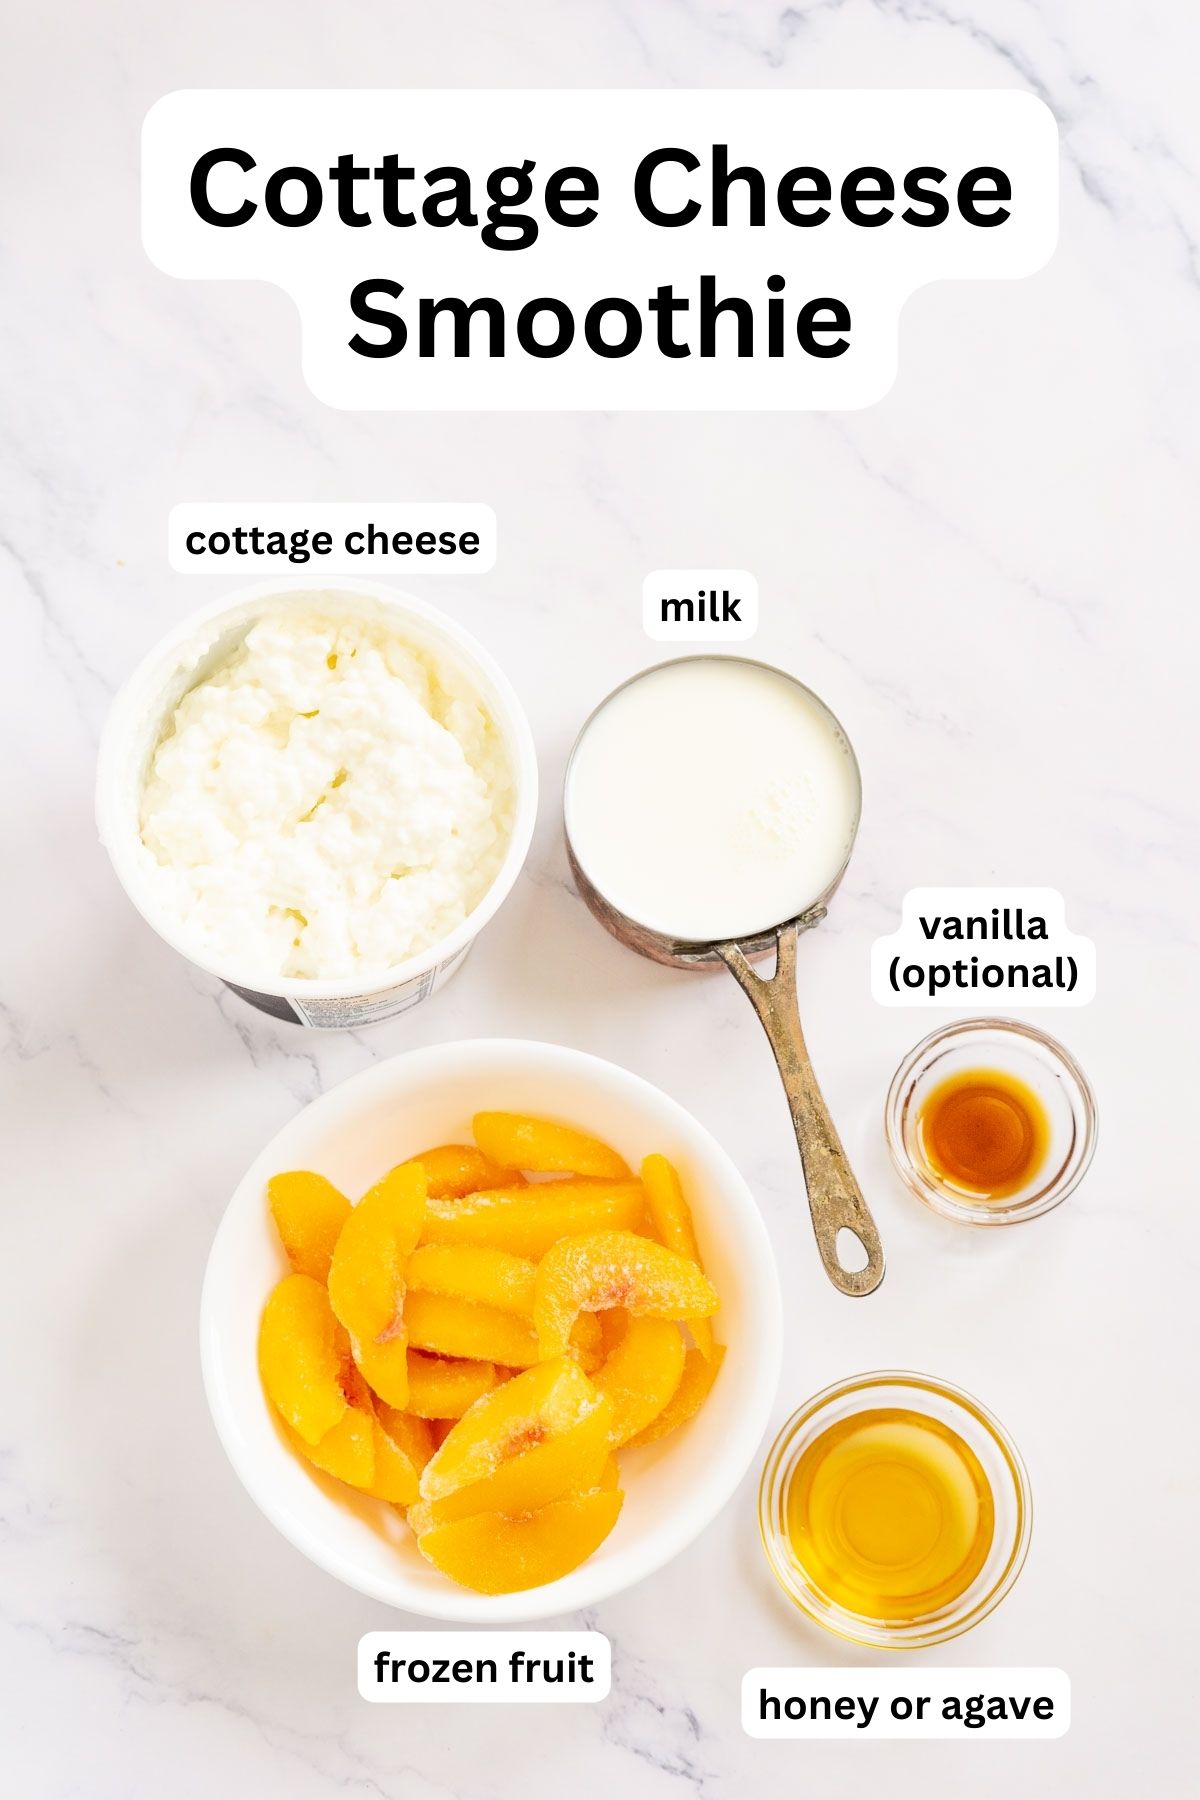 Ingredients to make a peach cottage cheese smoothie